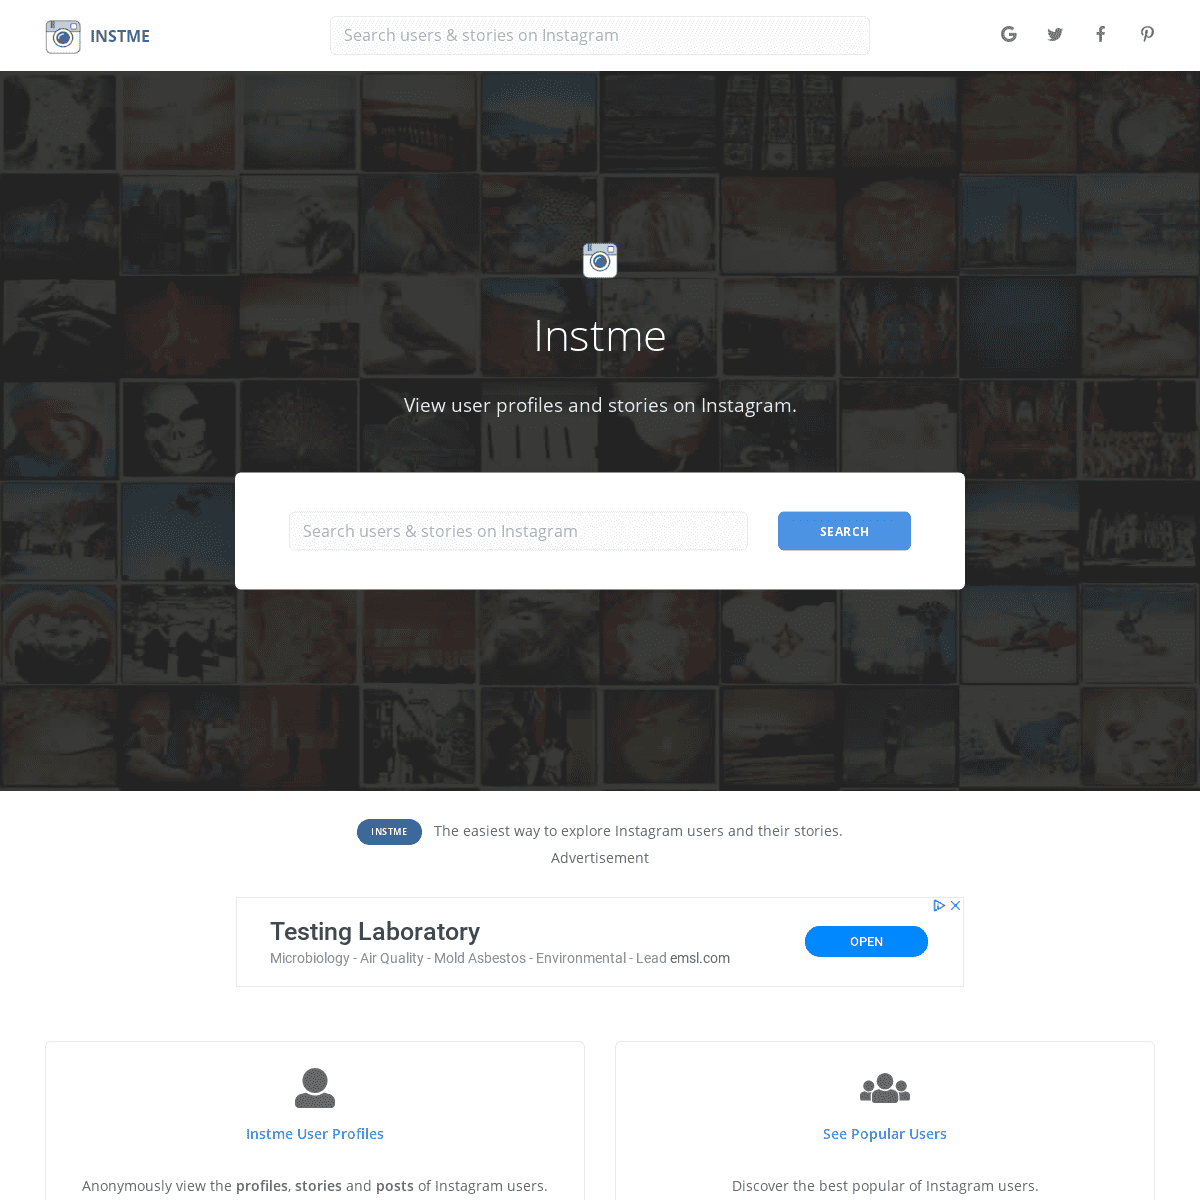 A complete backup of instme.com